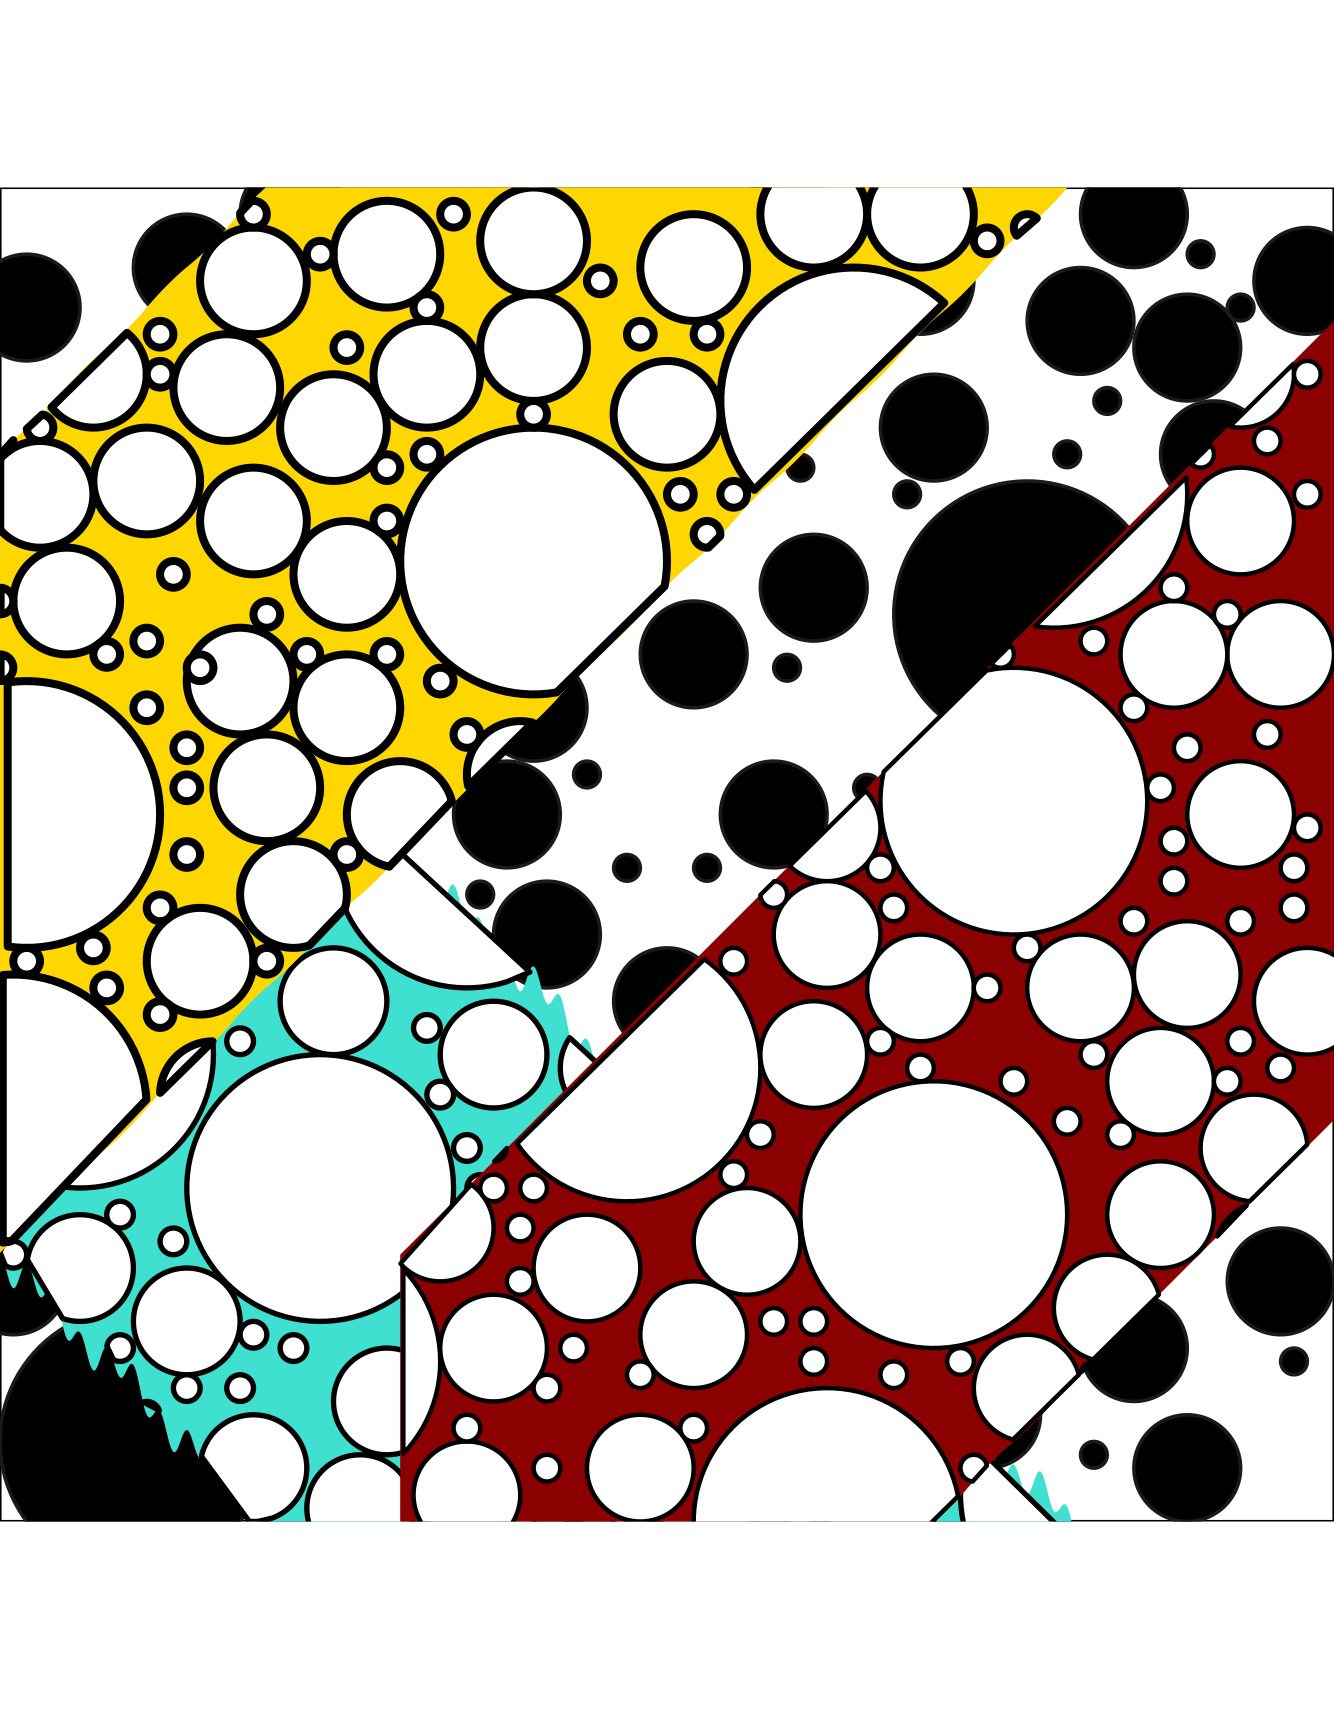 A generative image of various clusters of black and white packed circles. on white, yellow, turquoise, and red strips of color.